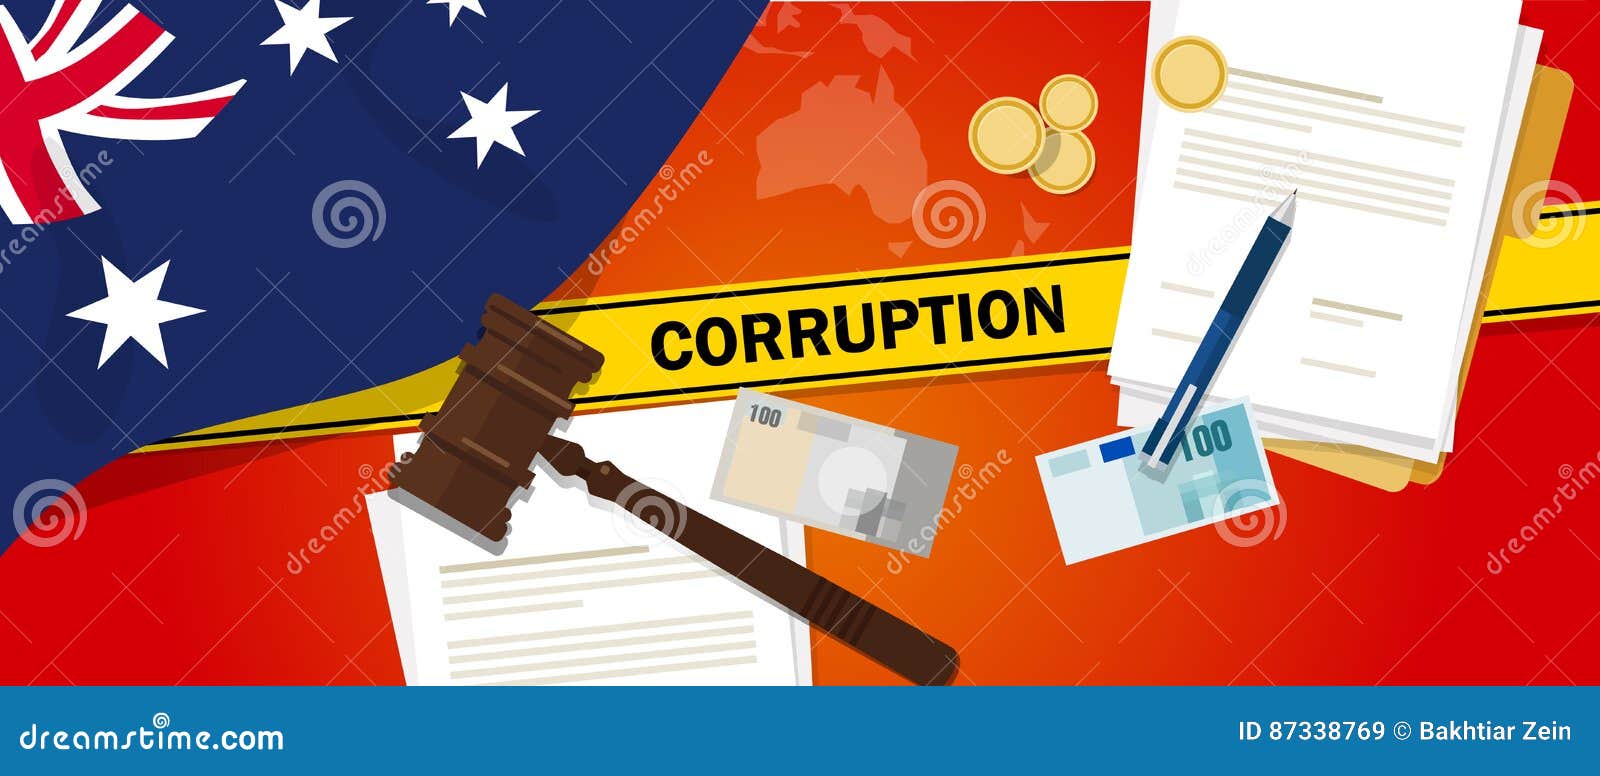 australia corruption money bribery financial law contract police line for a case scandal government official